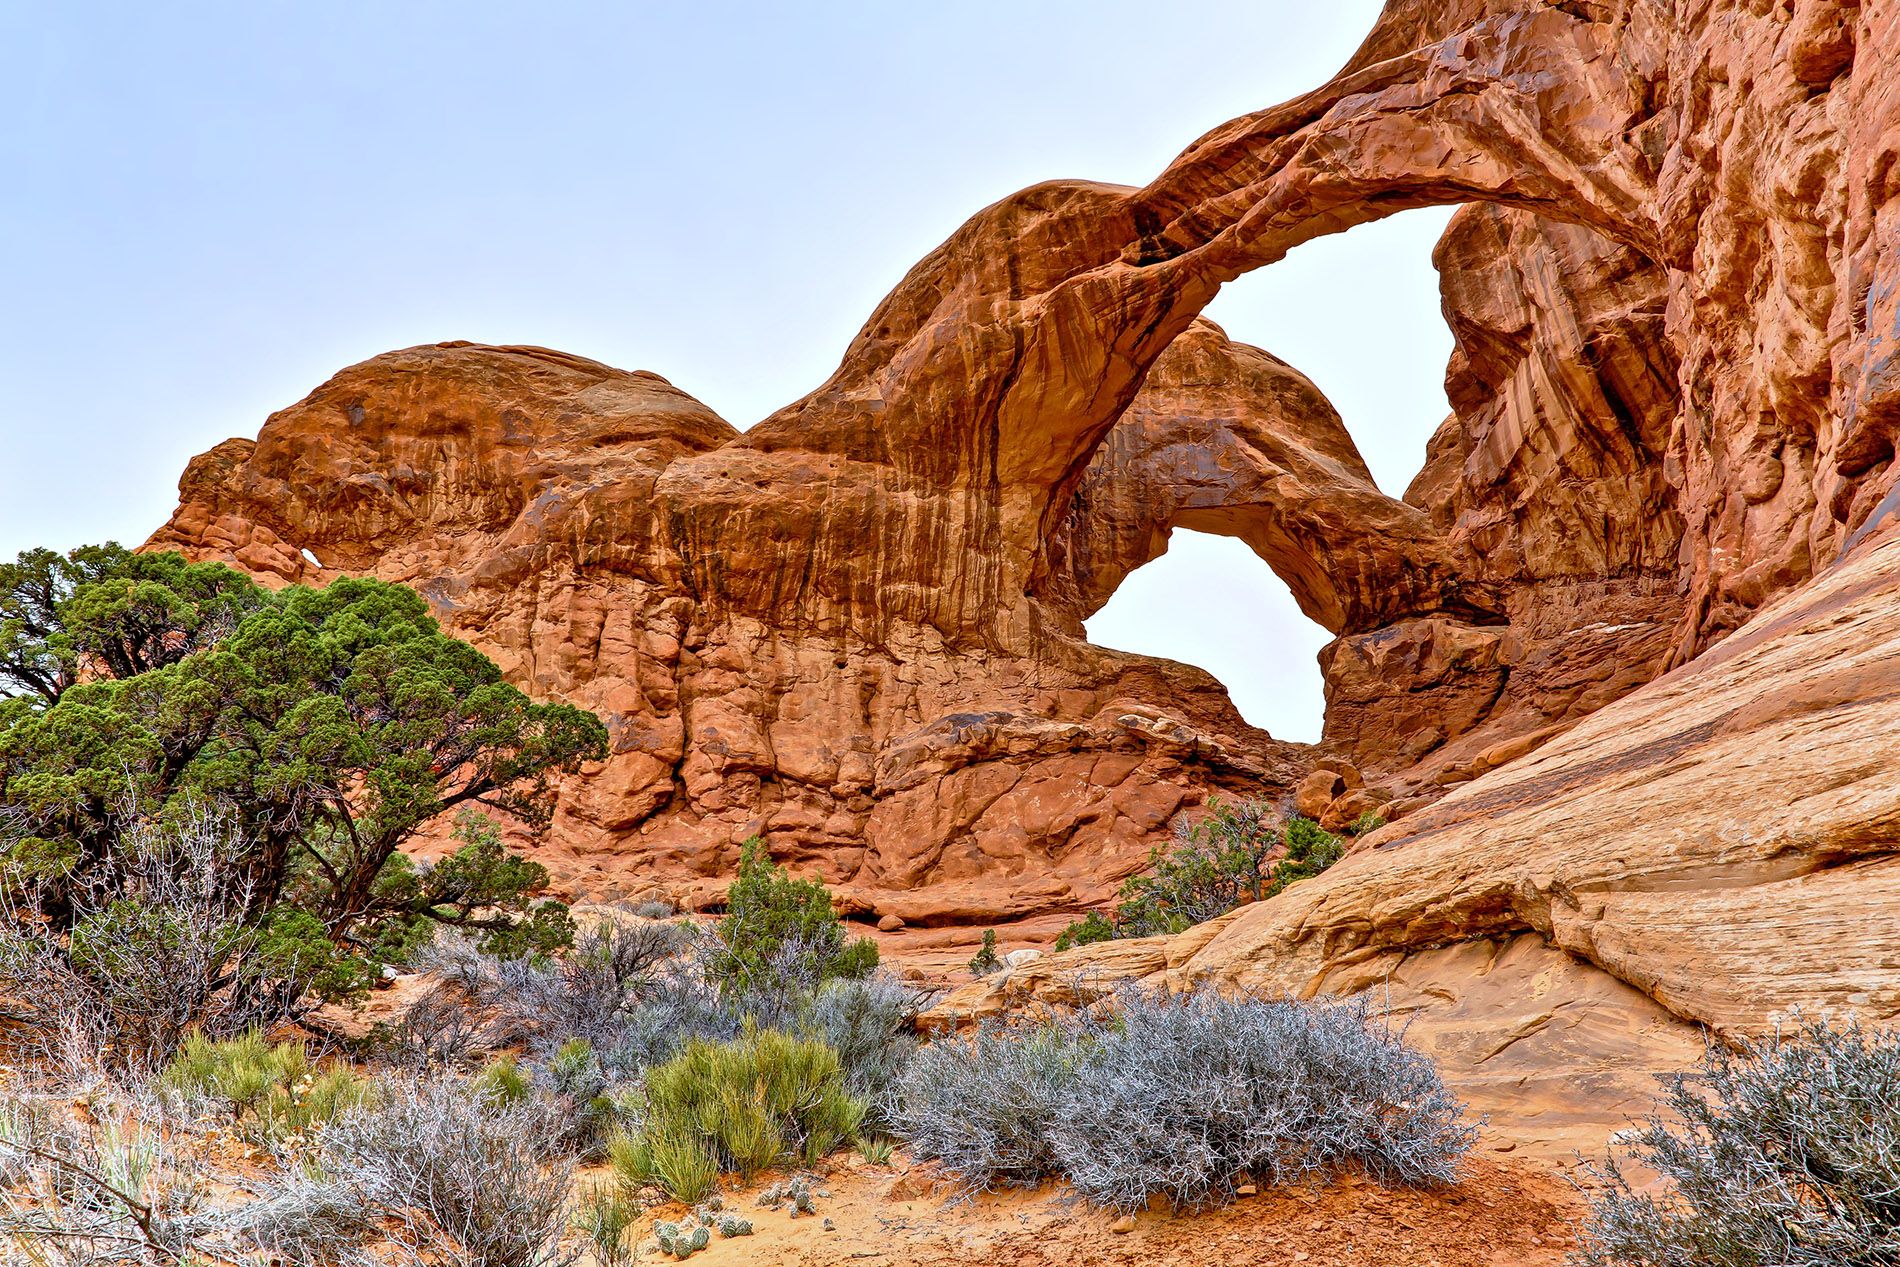 Above: Double Arch